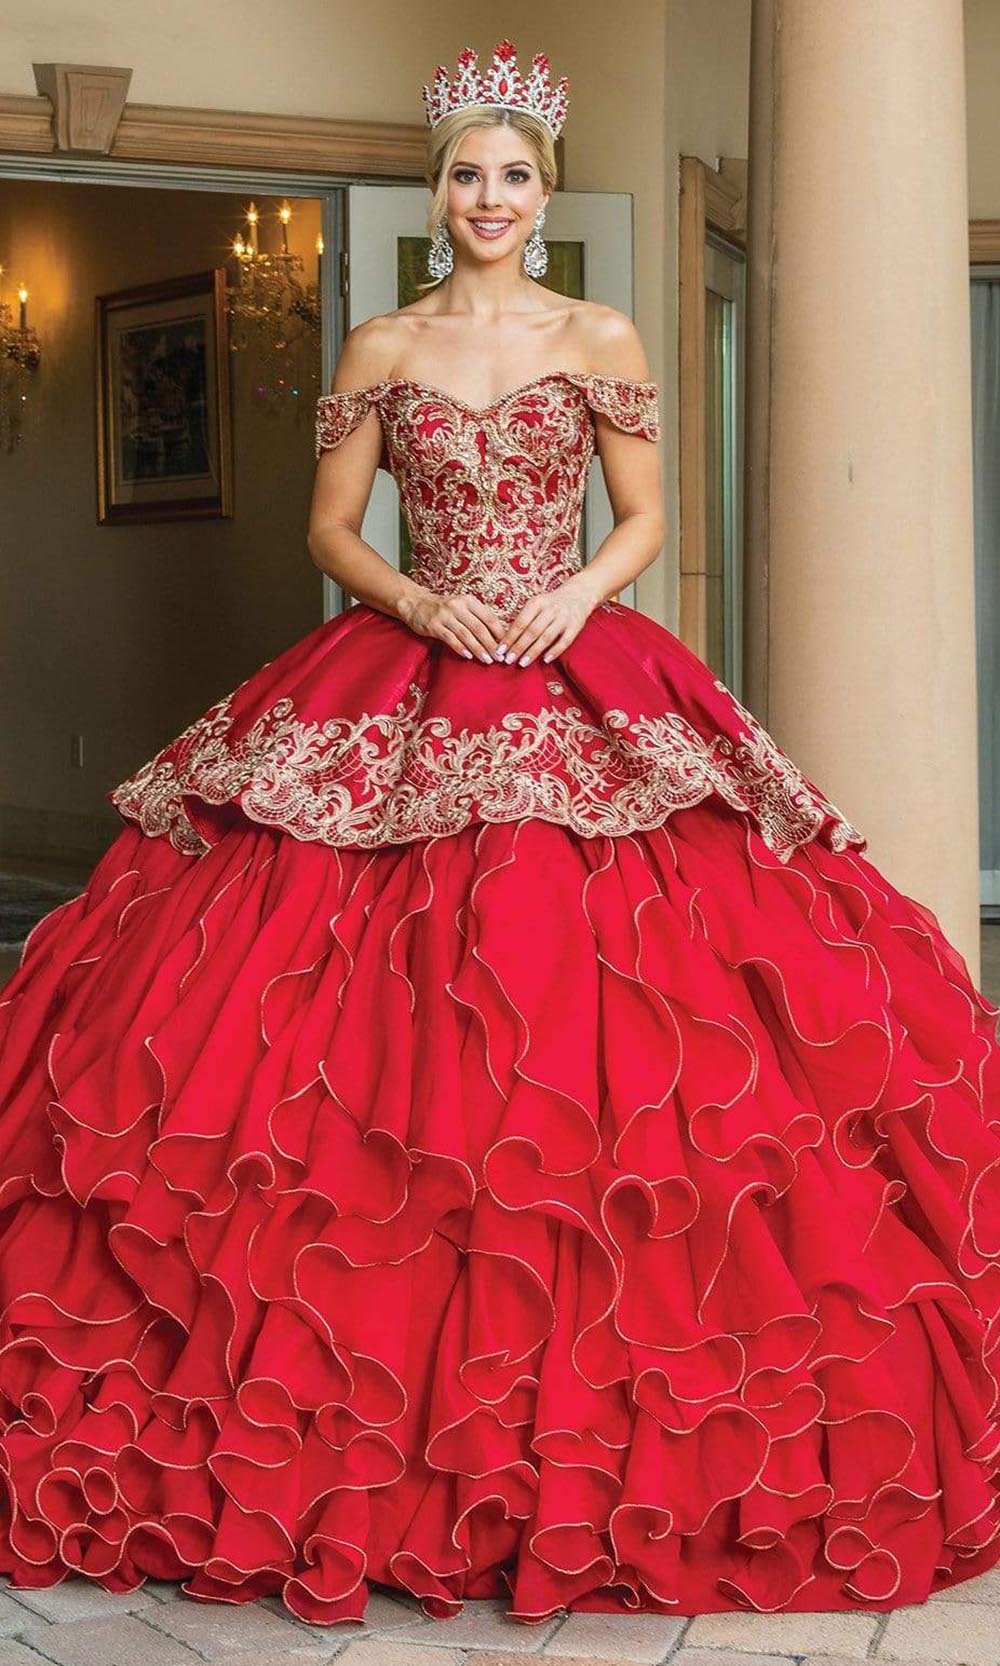 Dancing Queen - 1599 Applique-Ornate Ruffled Ballgown Special Occasion Dress XS / Burgundy